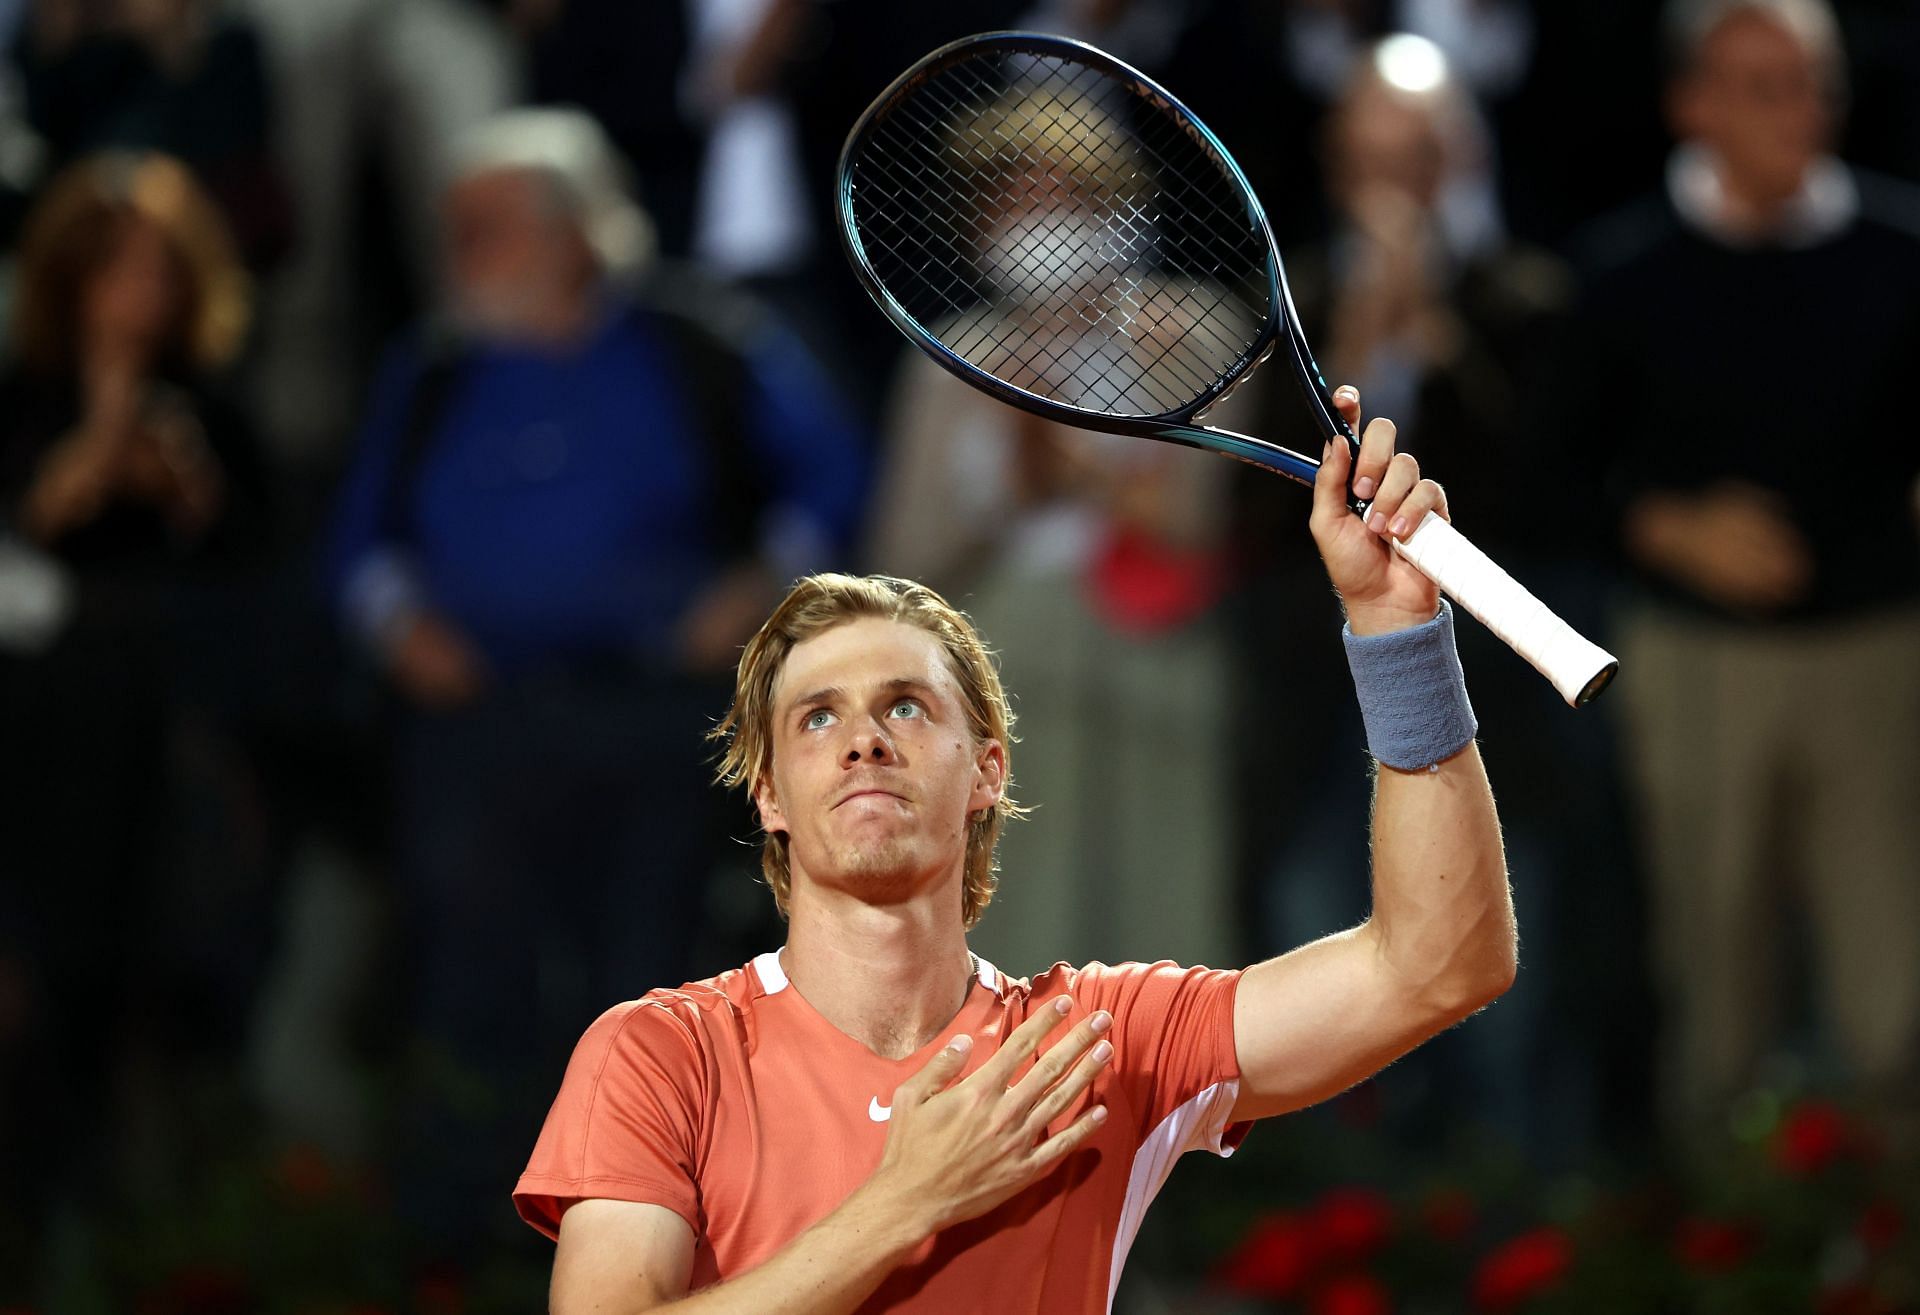 Denis Shapovalov pulled through in a deciding set against reigning champion Rafael Nadal in the third round of the Italian Open.